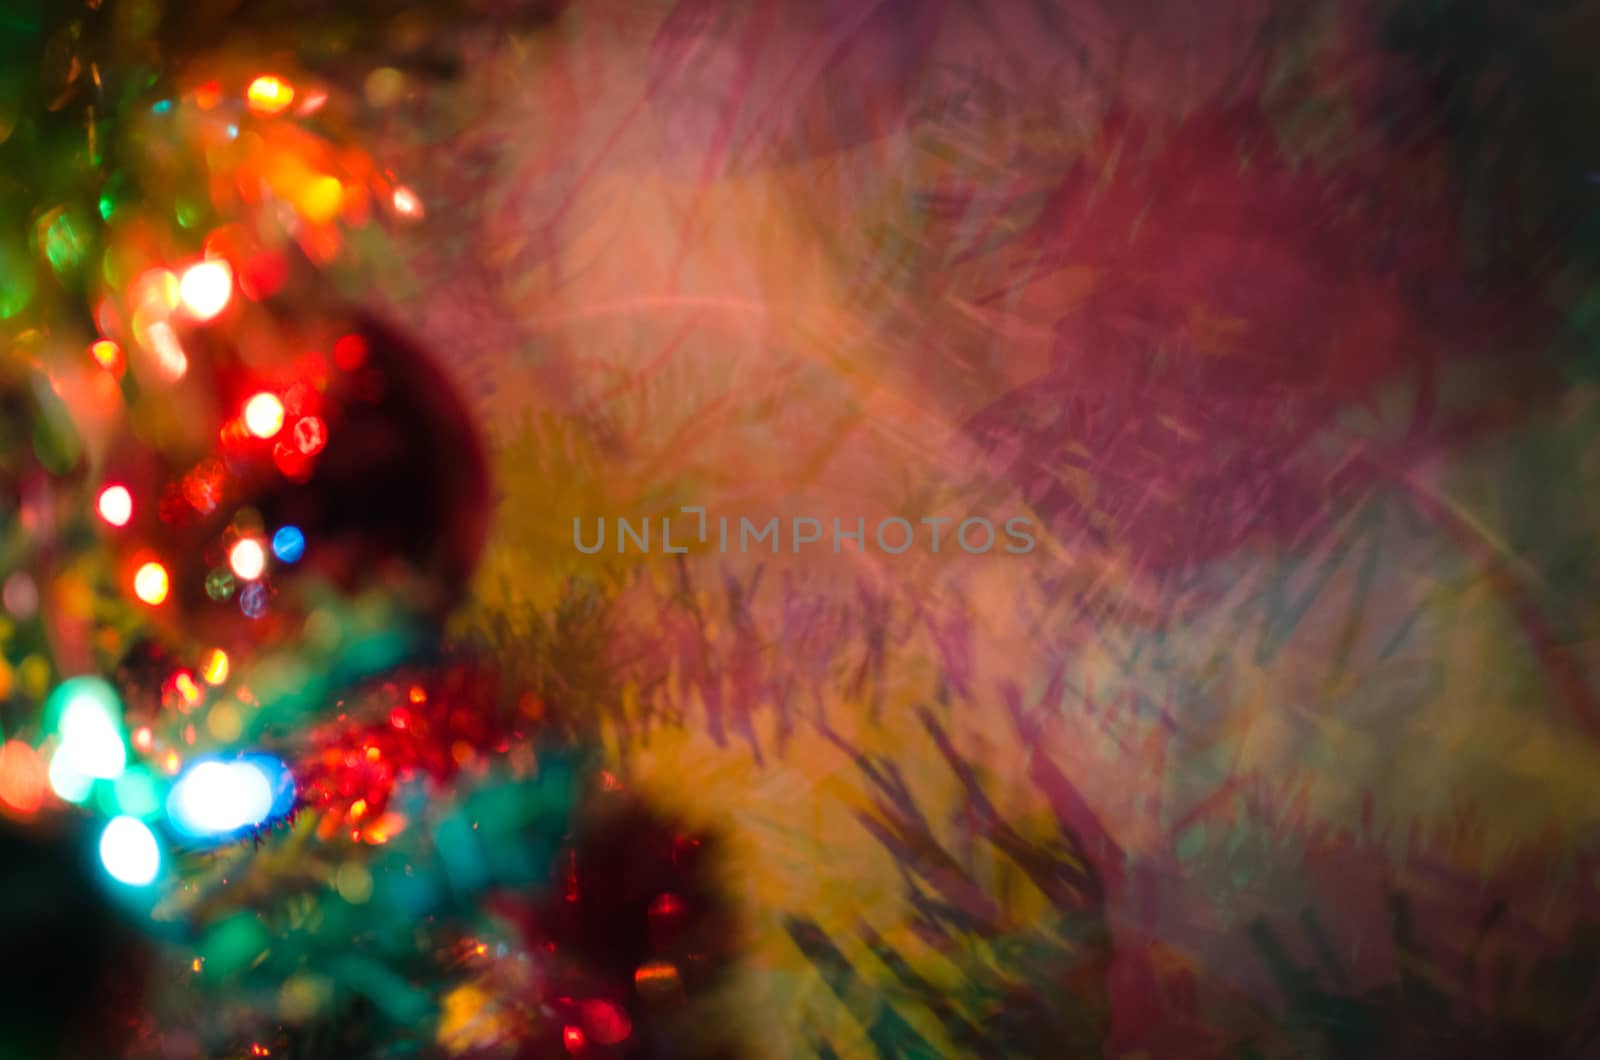 Magicall multi color figures made by light over Christmas tree balls and spumillion